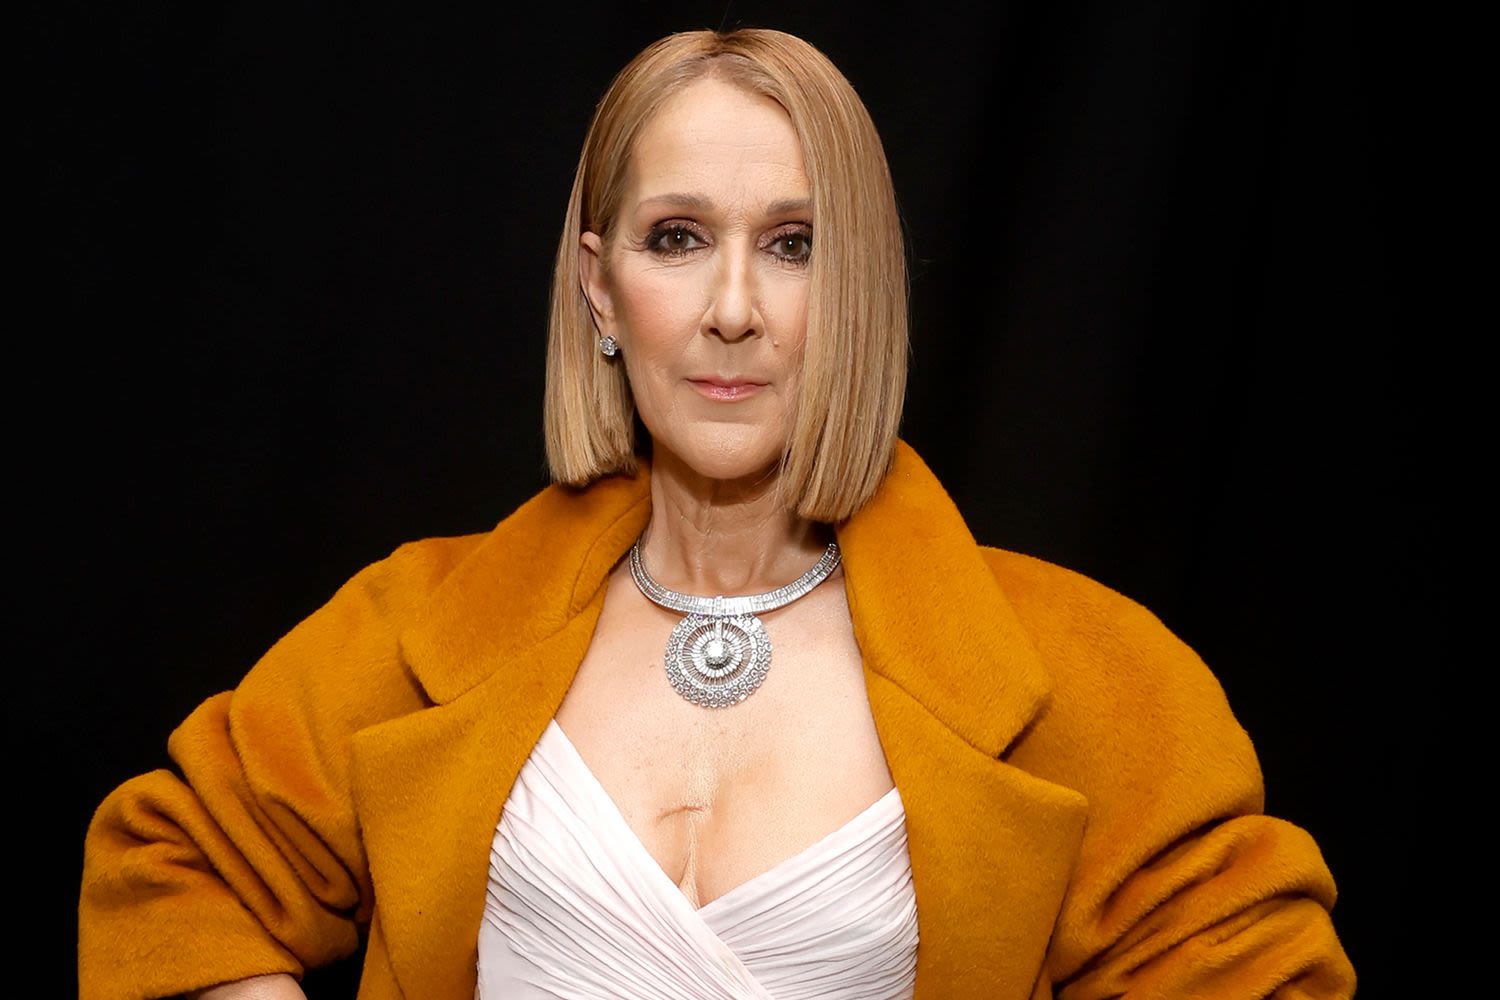 Céline Dion Cries as She Endures Excruciating Stiff-Person Syndrome Crisis: 'If She Goes Back ... We'll Do a 9-1-1'